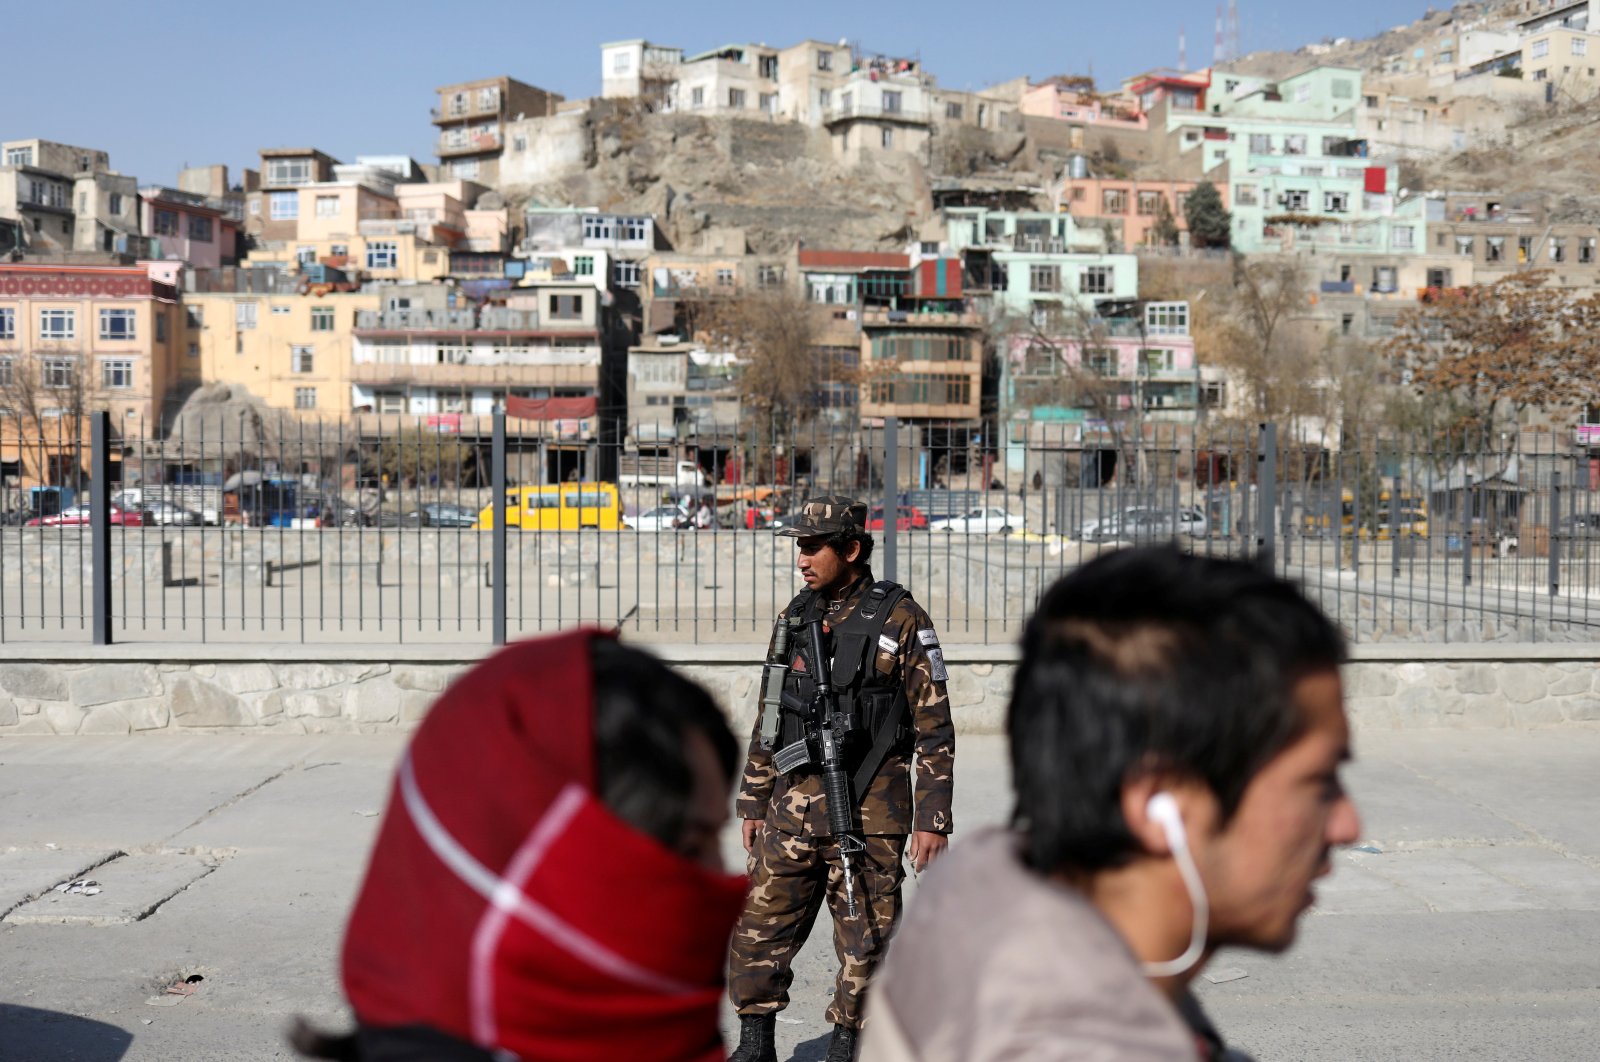 A Taliban fighter stands as he guards a checkpoint in Kabul, Afghanistan, Nov. 27, 2021. (Reuters Photo)